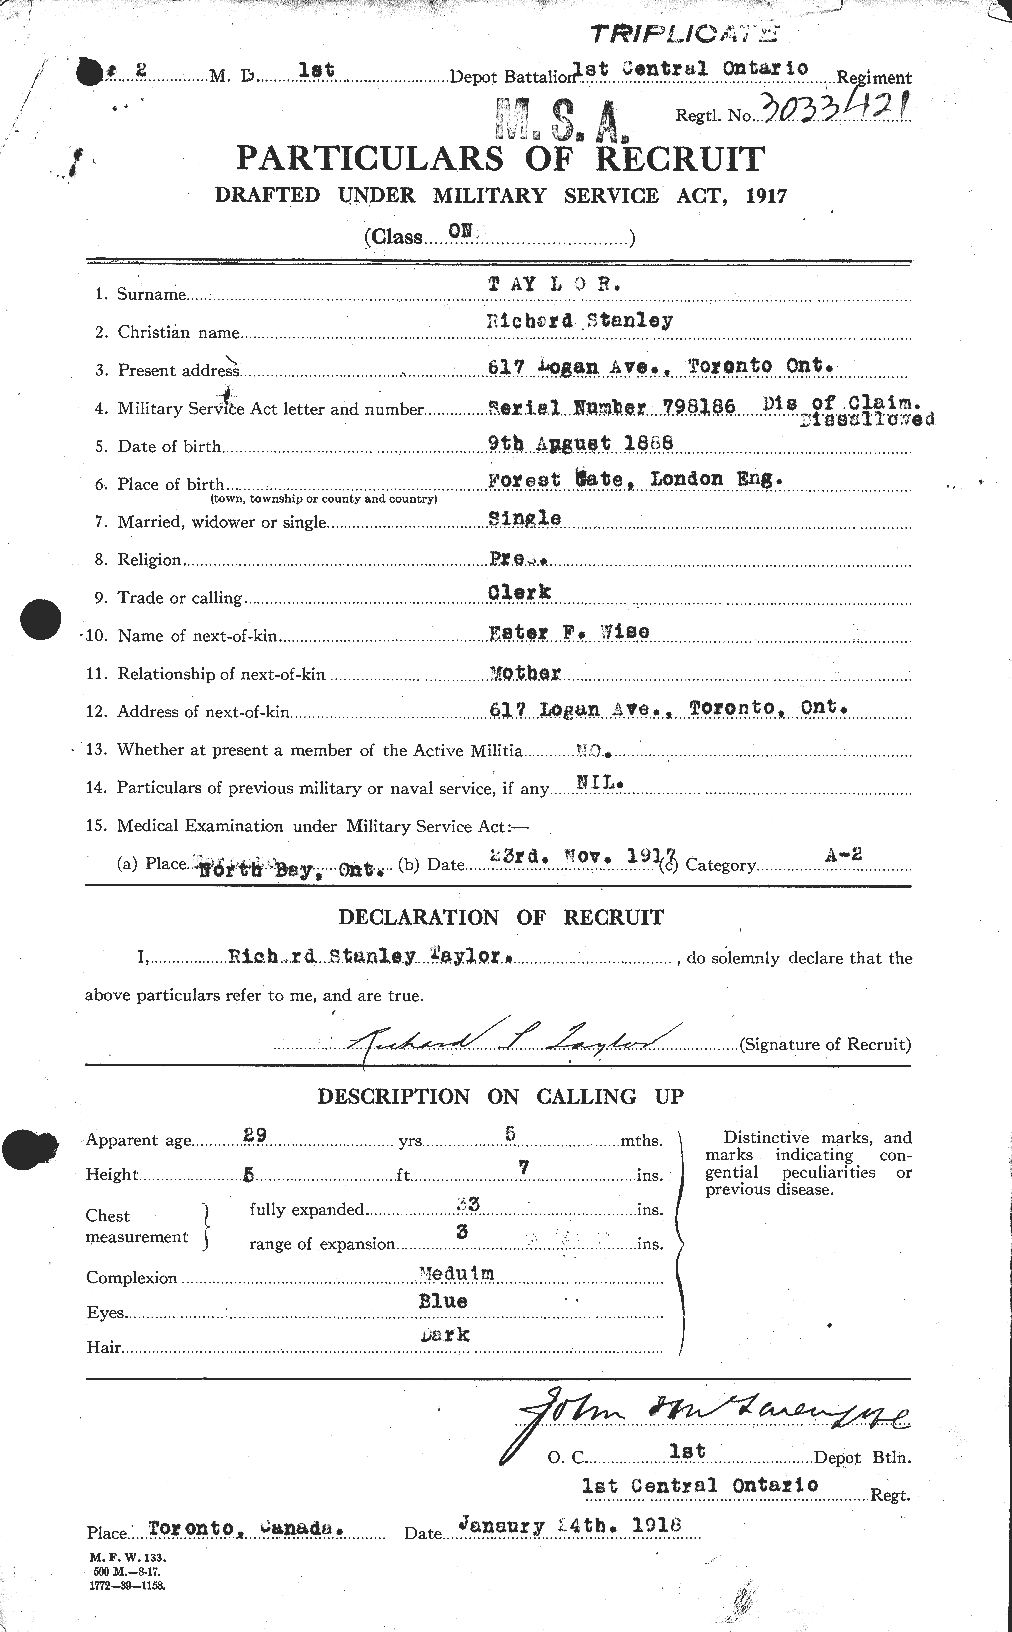 Personnel Records of the First World War - CEF 627420a